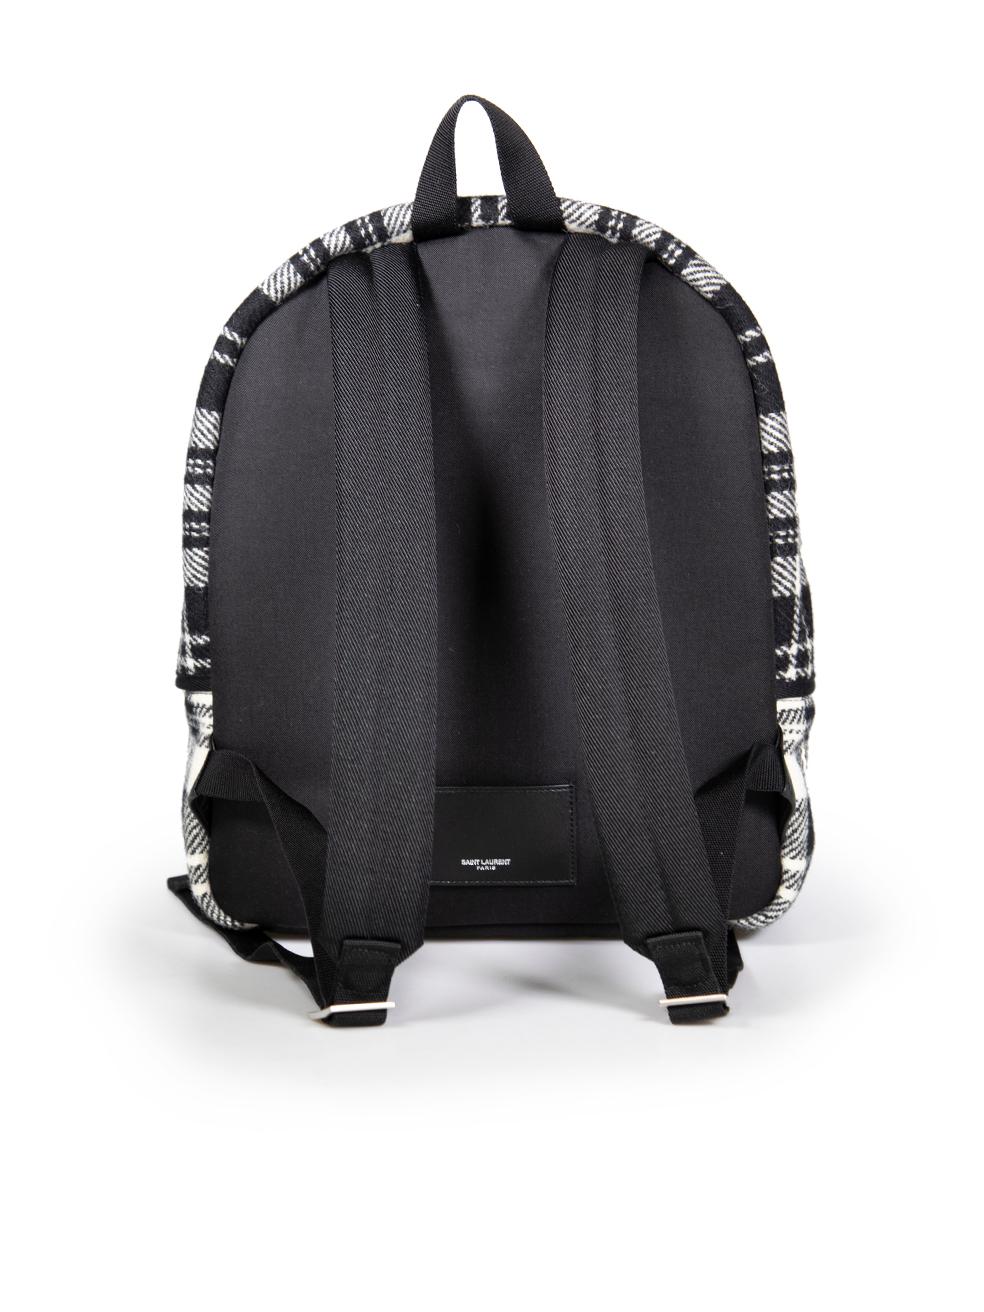 Saint Laurent Black Wool Tartan Pattern City Backpack In New Condition For Sale In London, GB